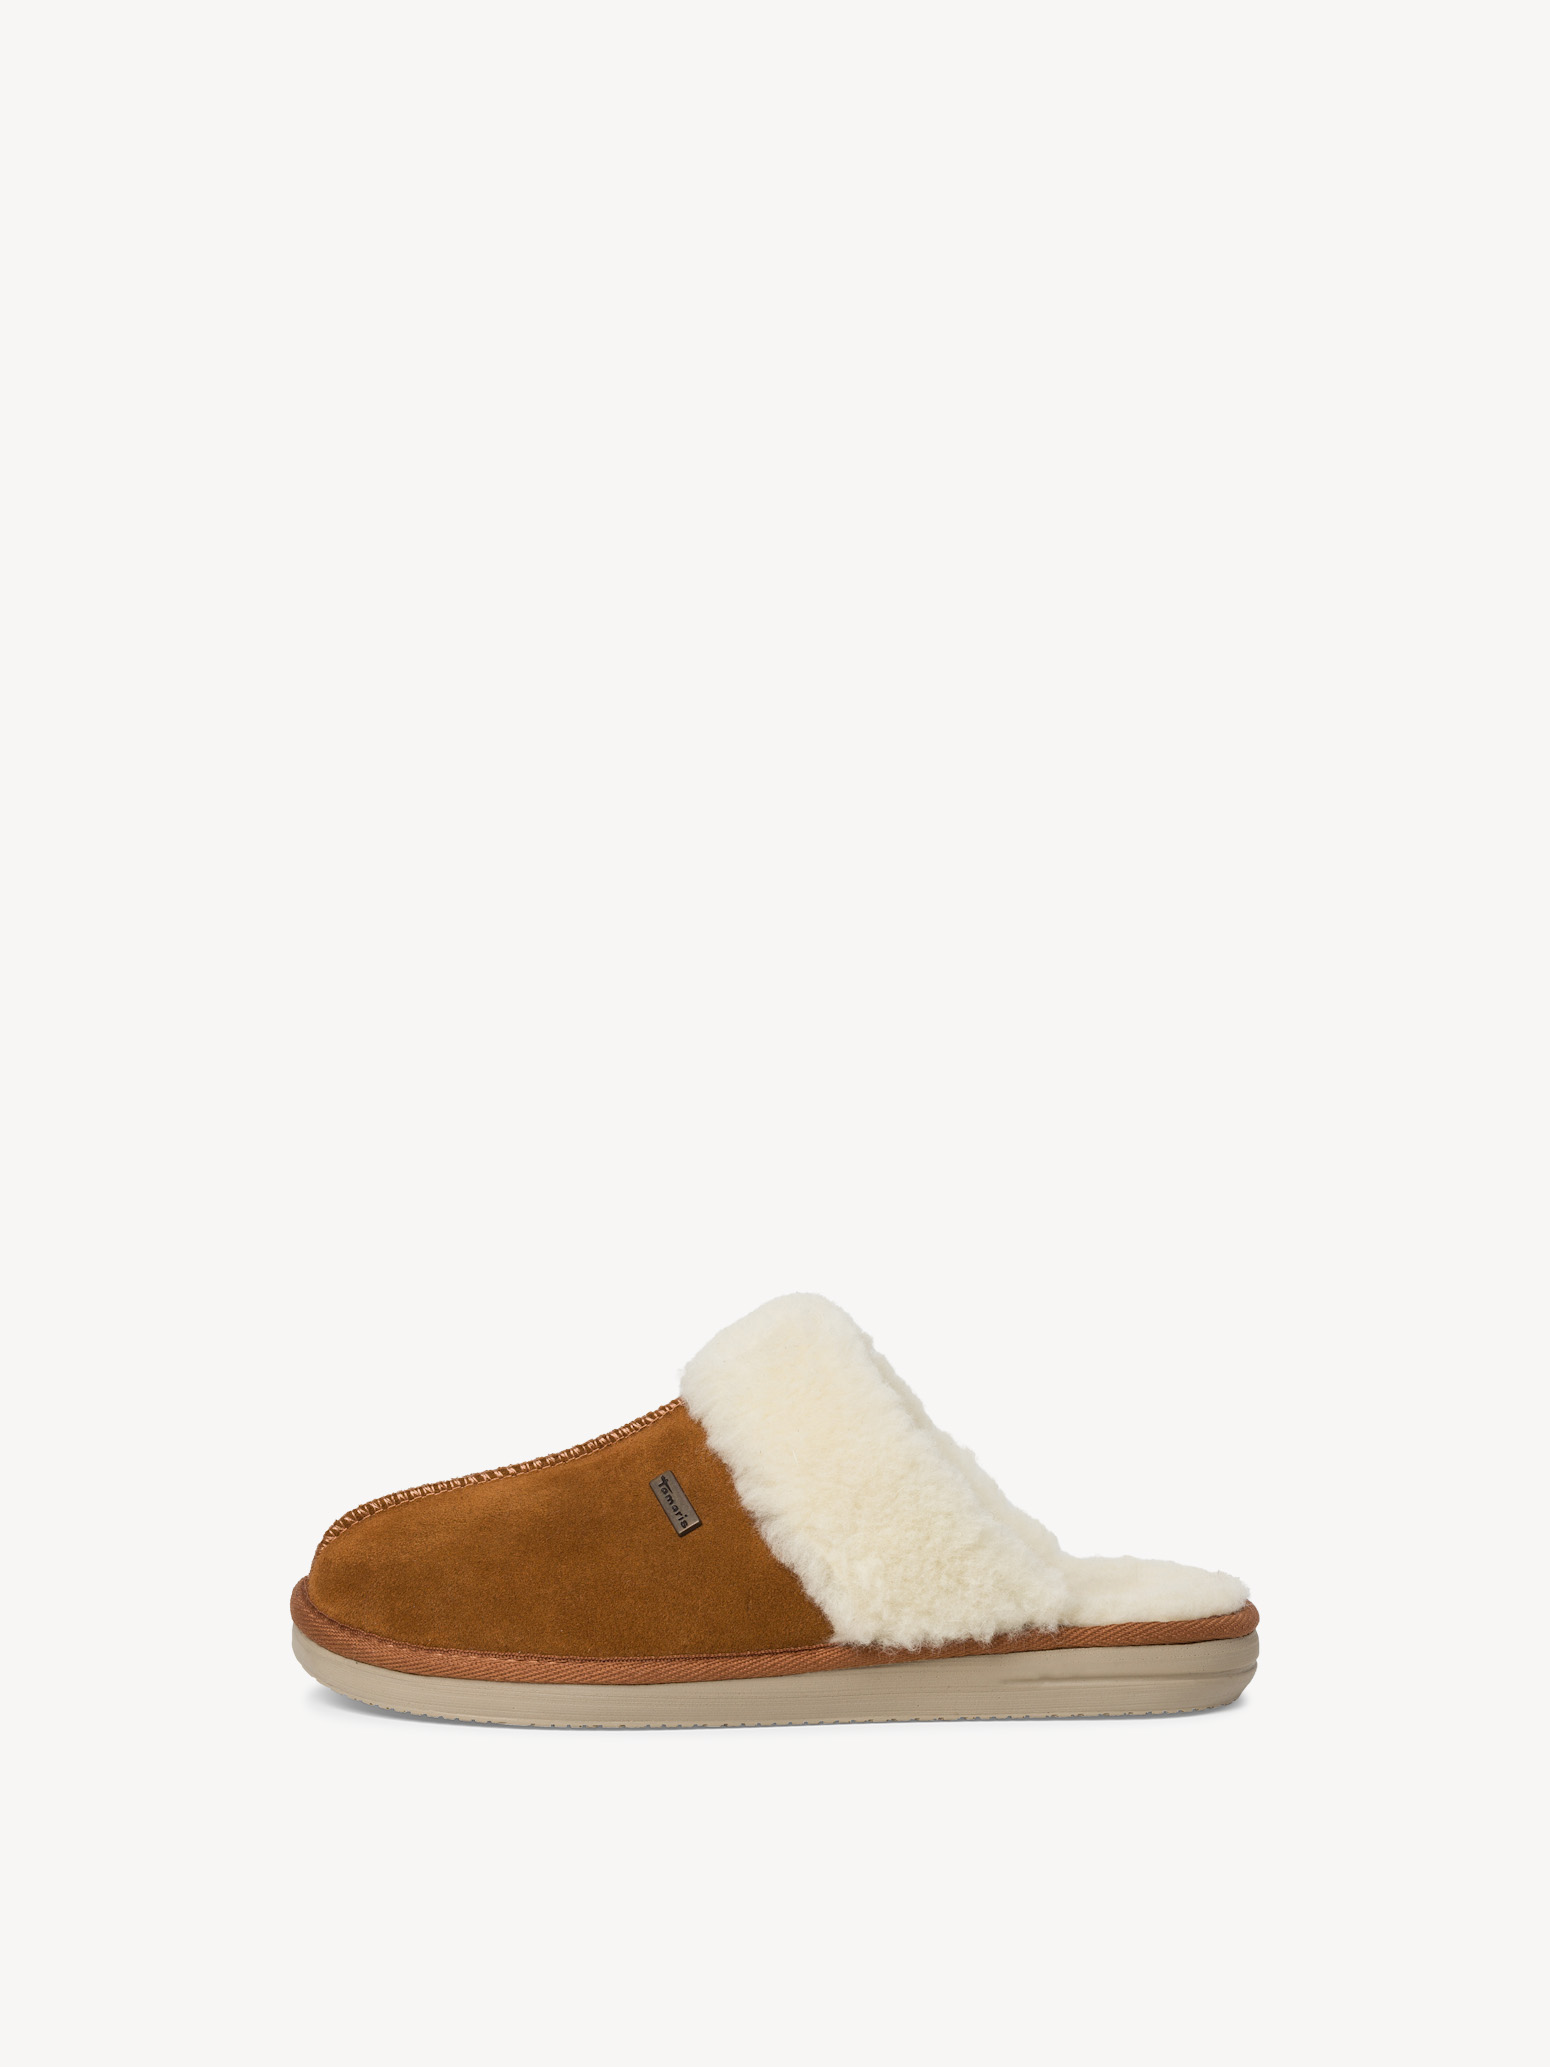 Leather Slippers - beige